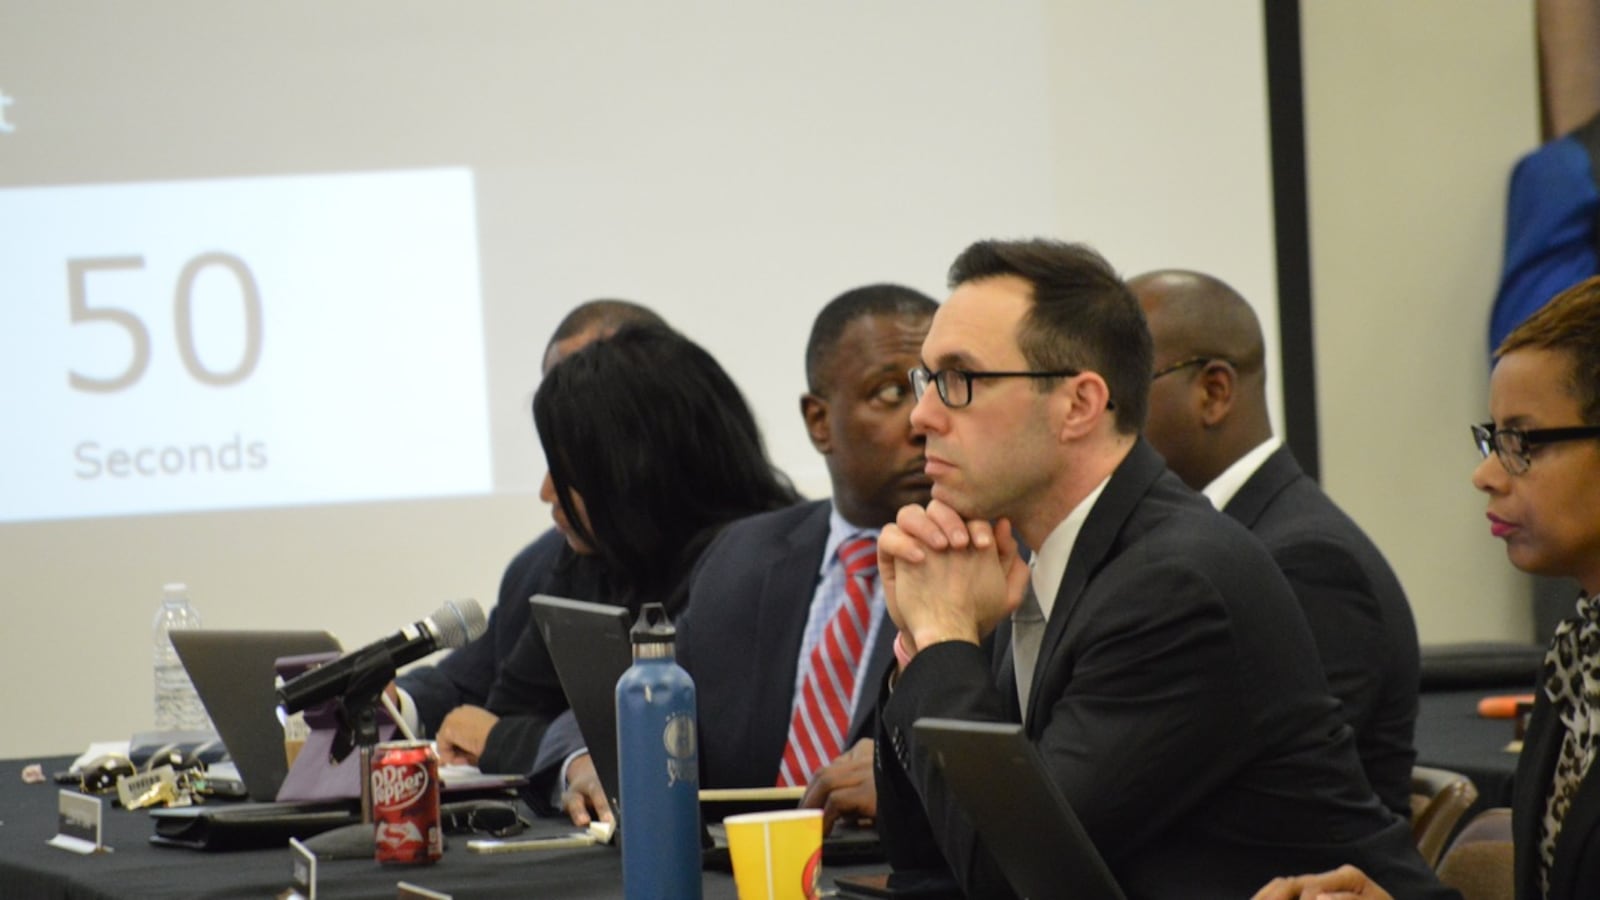 Shelby County Schools innovation chief Brad Leon listens to discussion during a recent school board meeting in Memphis.